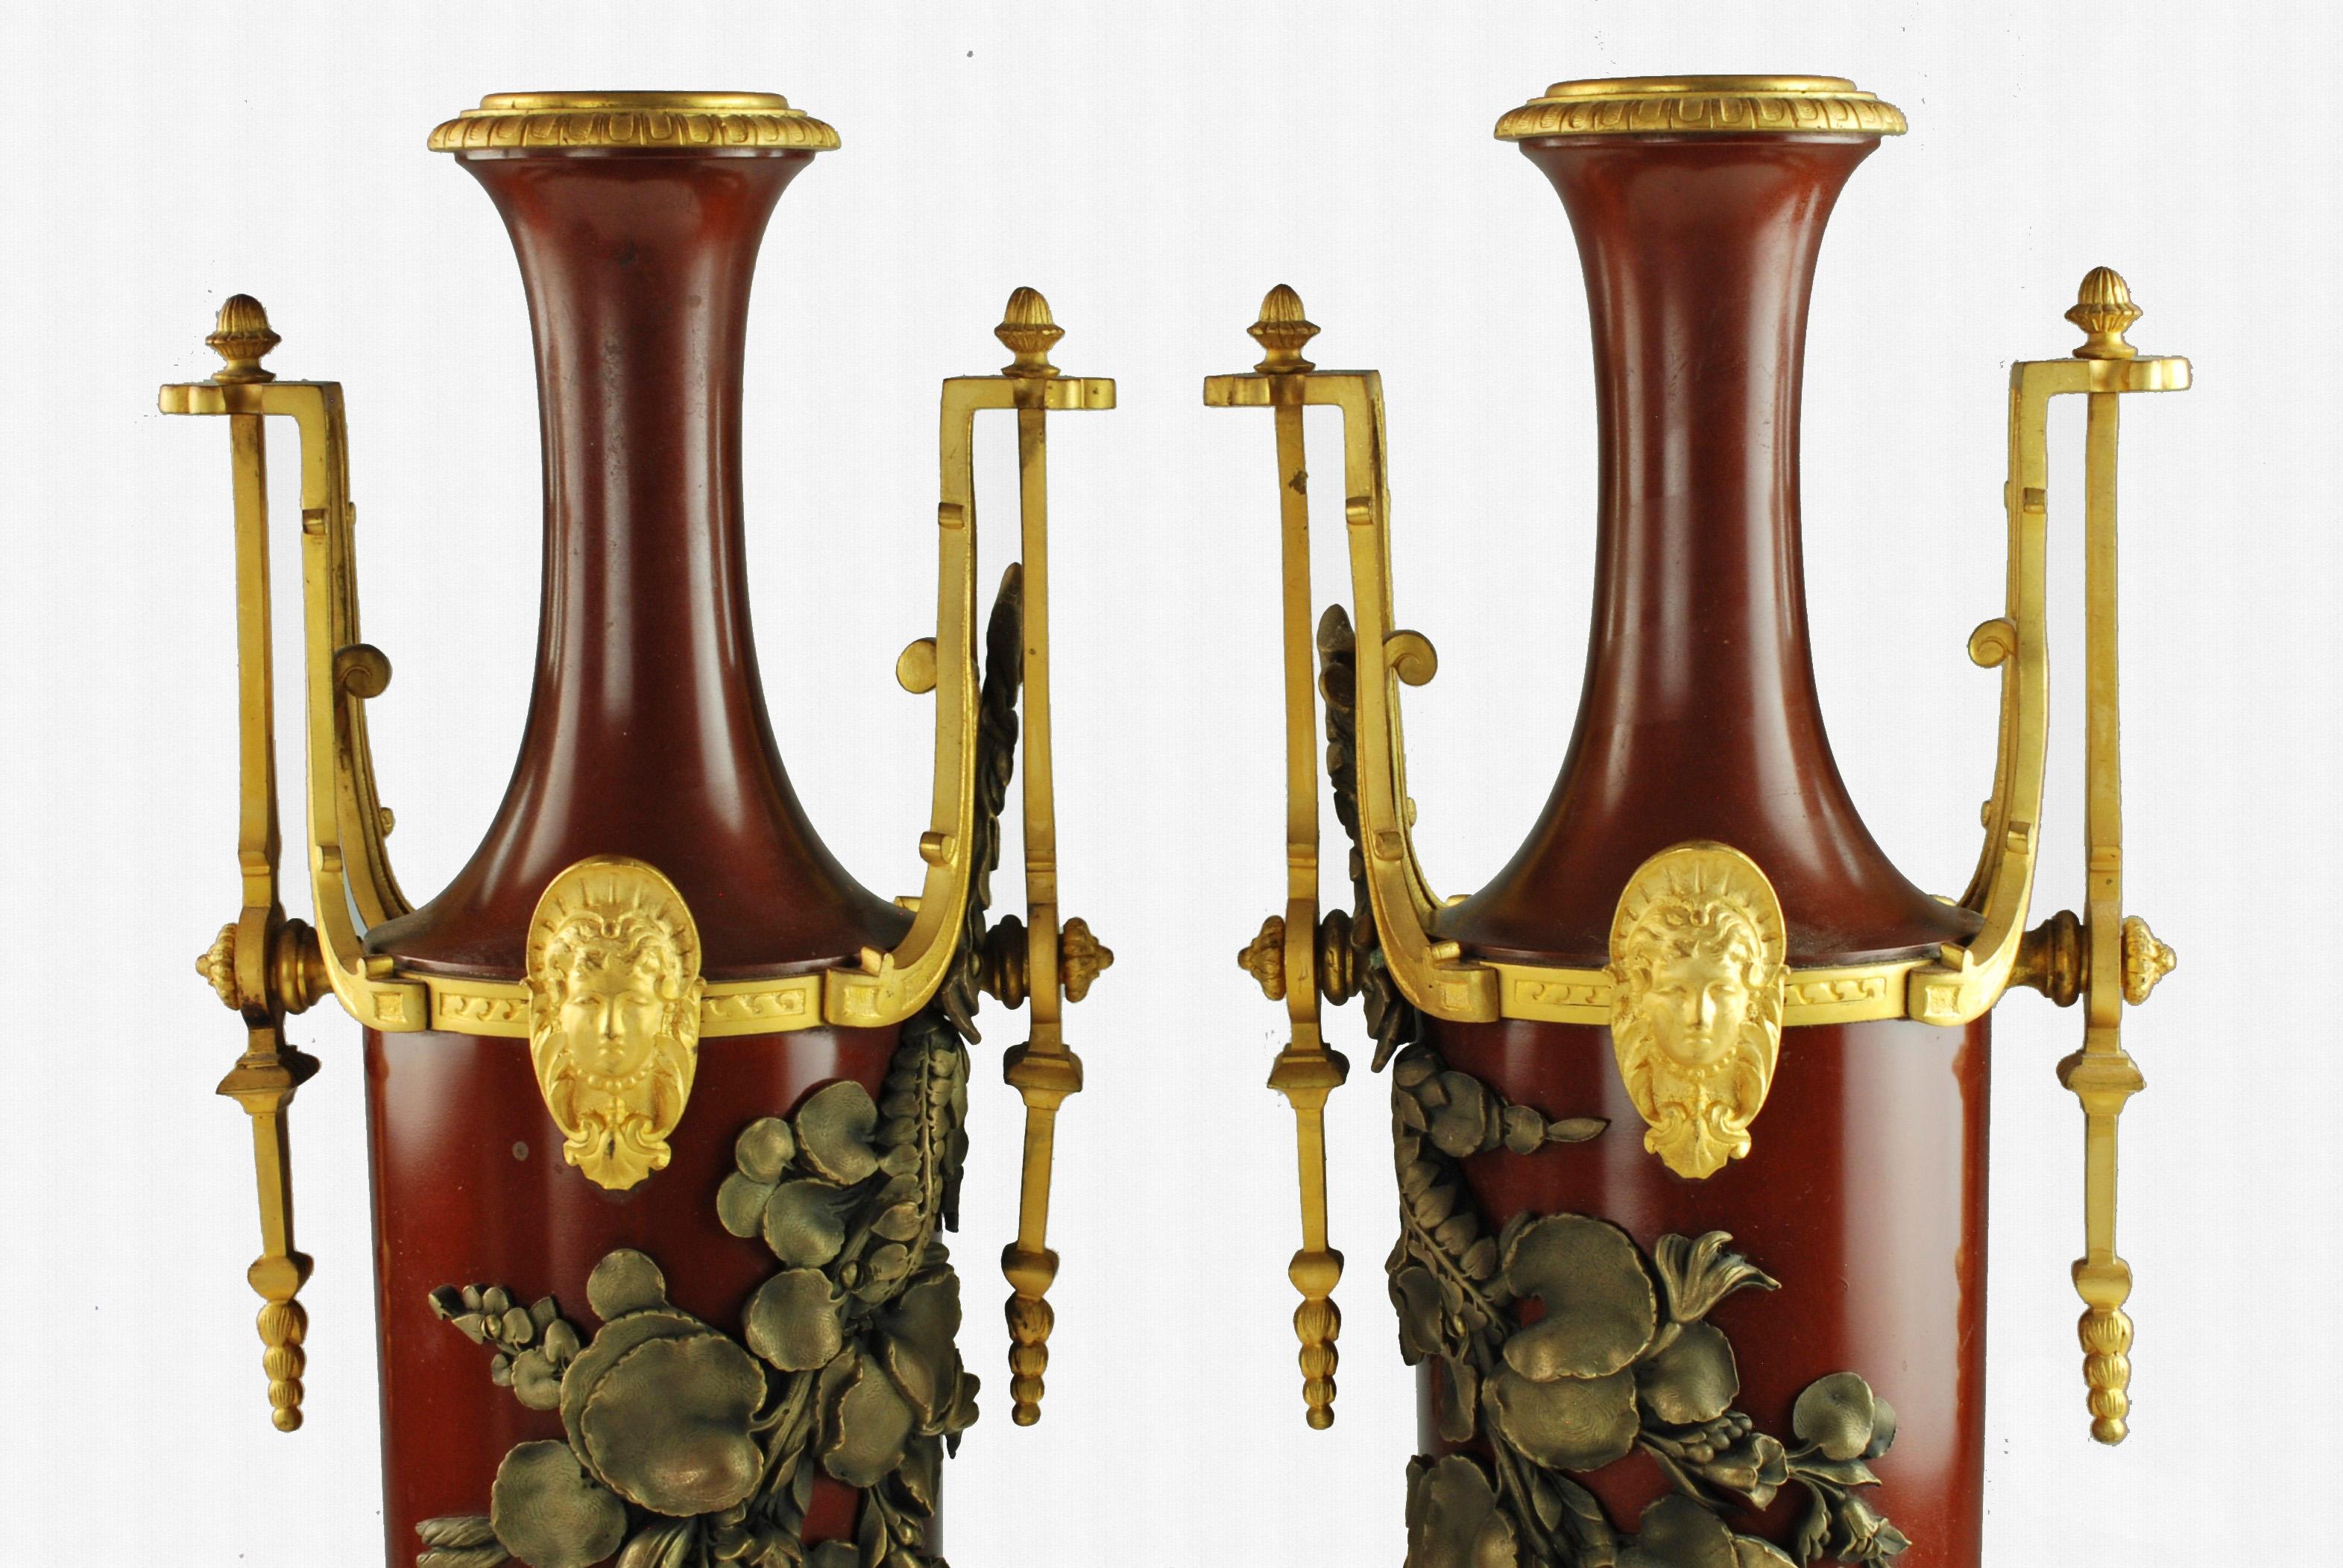 Neoclassical French Gilt & Patinated Bronze Garniture with Applied Foliate/Floral Decoration For Sale